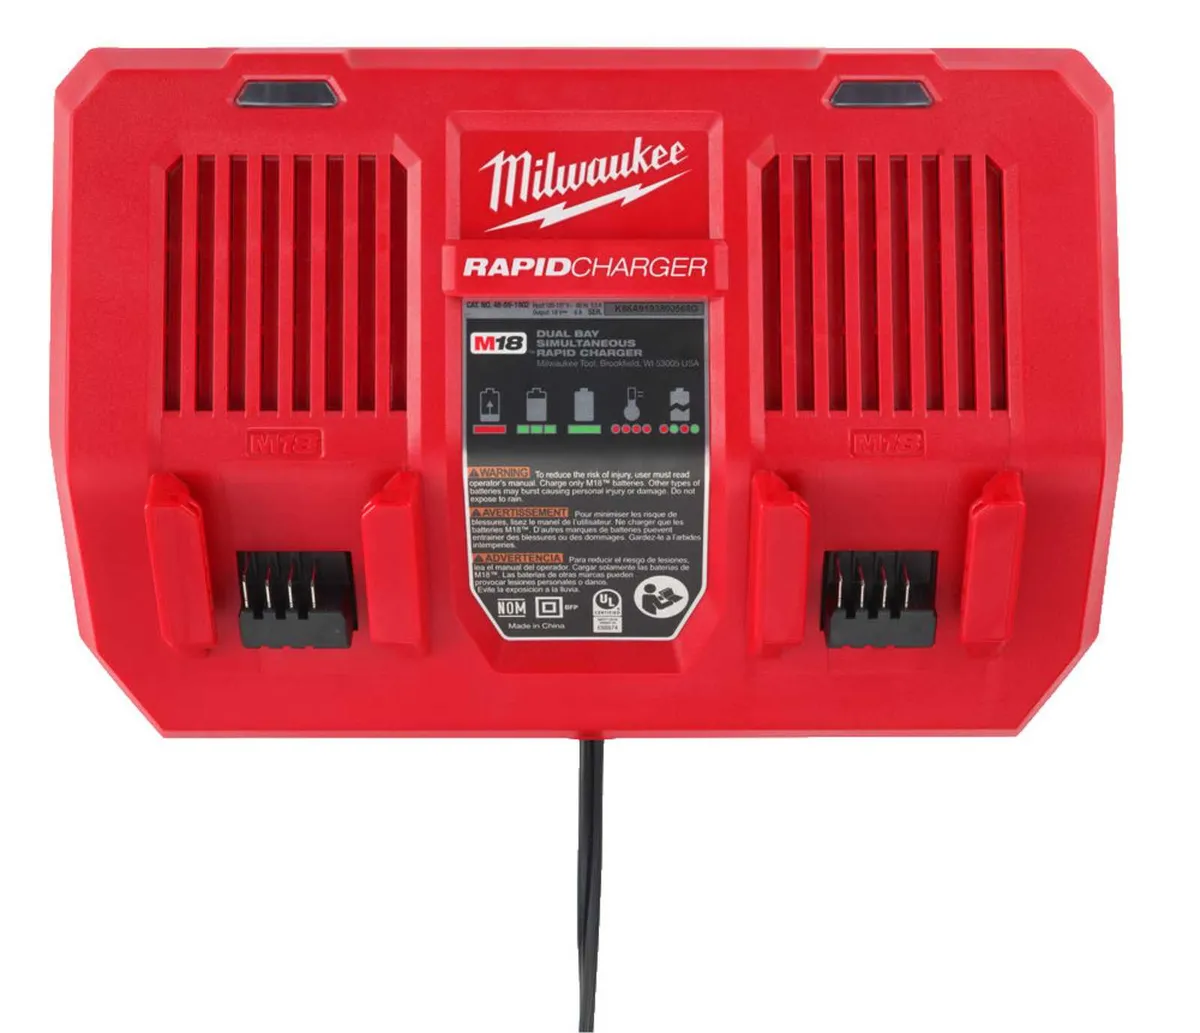 Milwaukee M18_DFC Duel Bay Rapid Charger